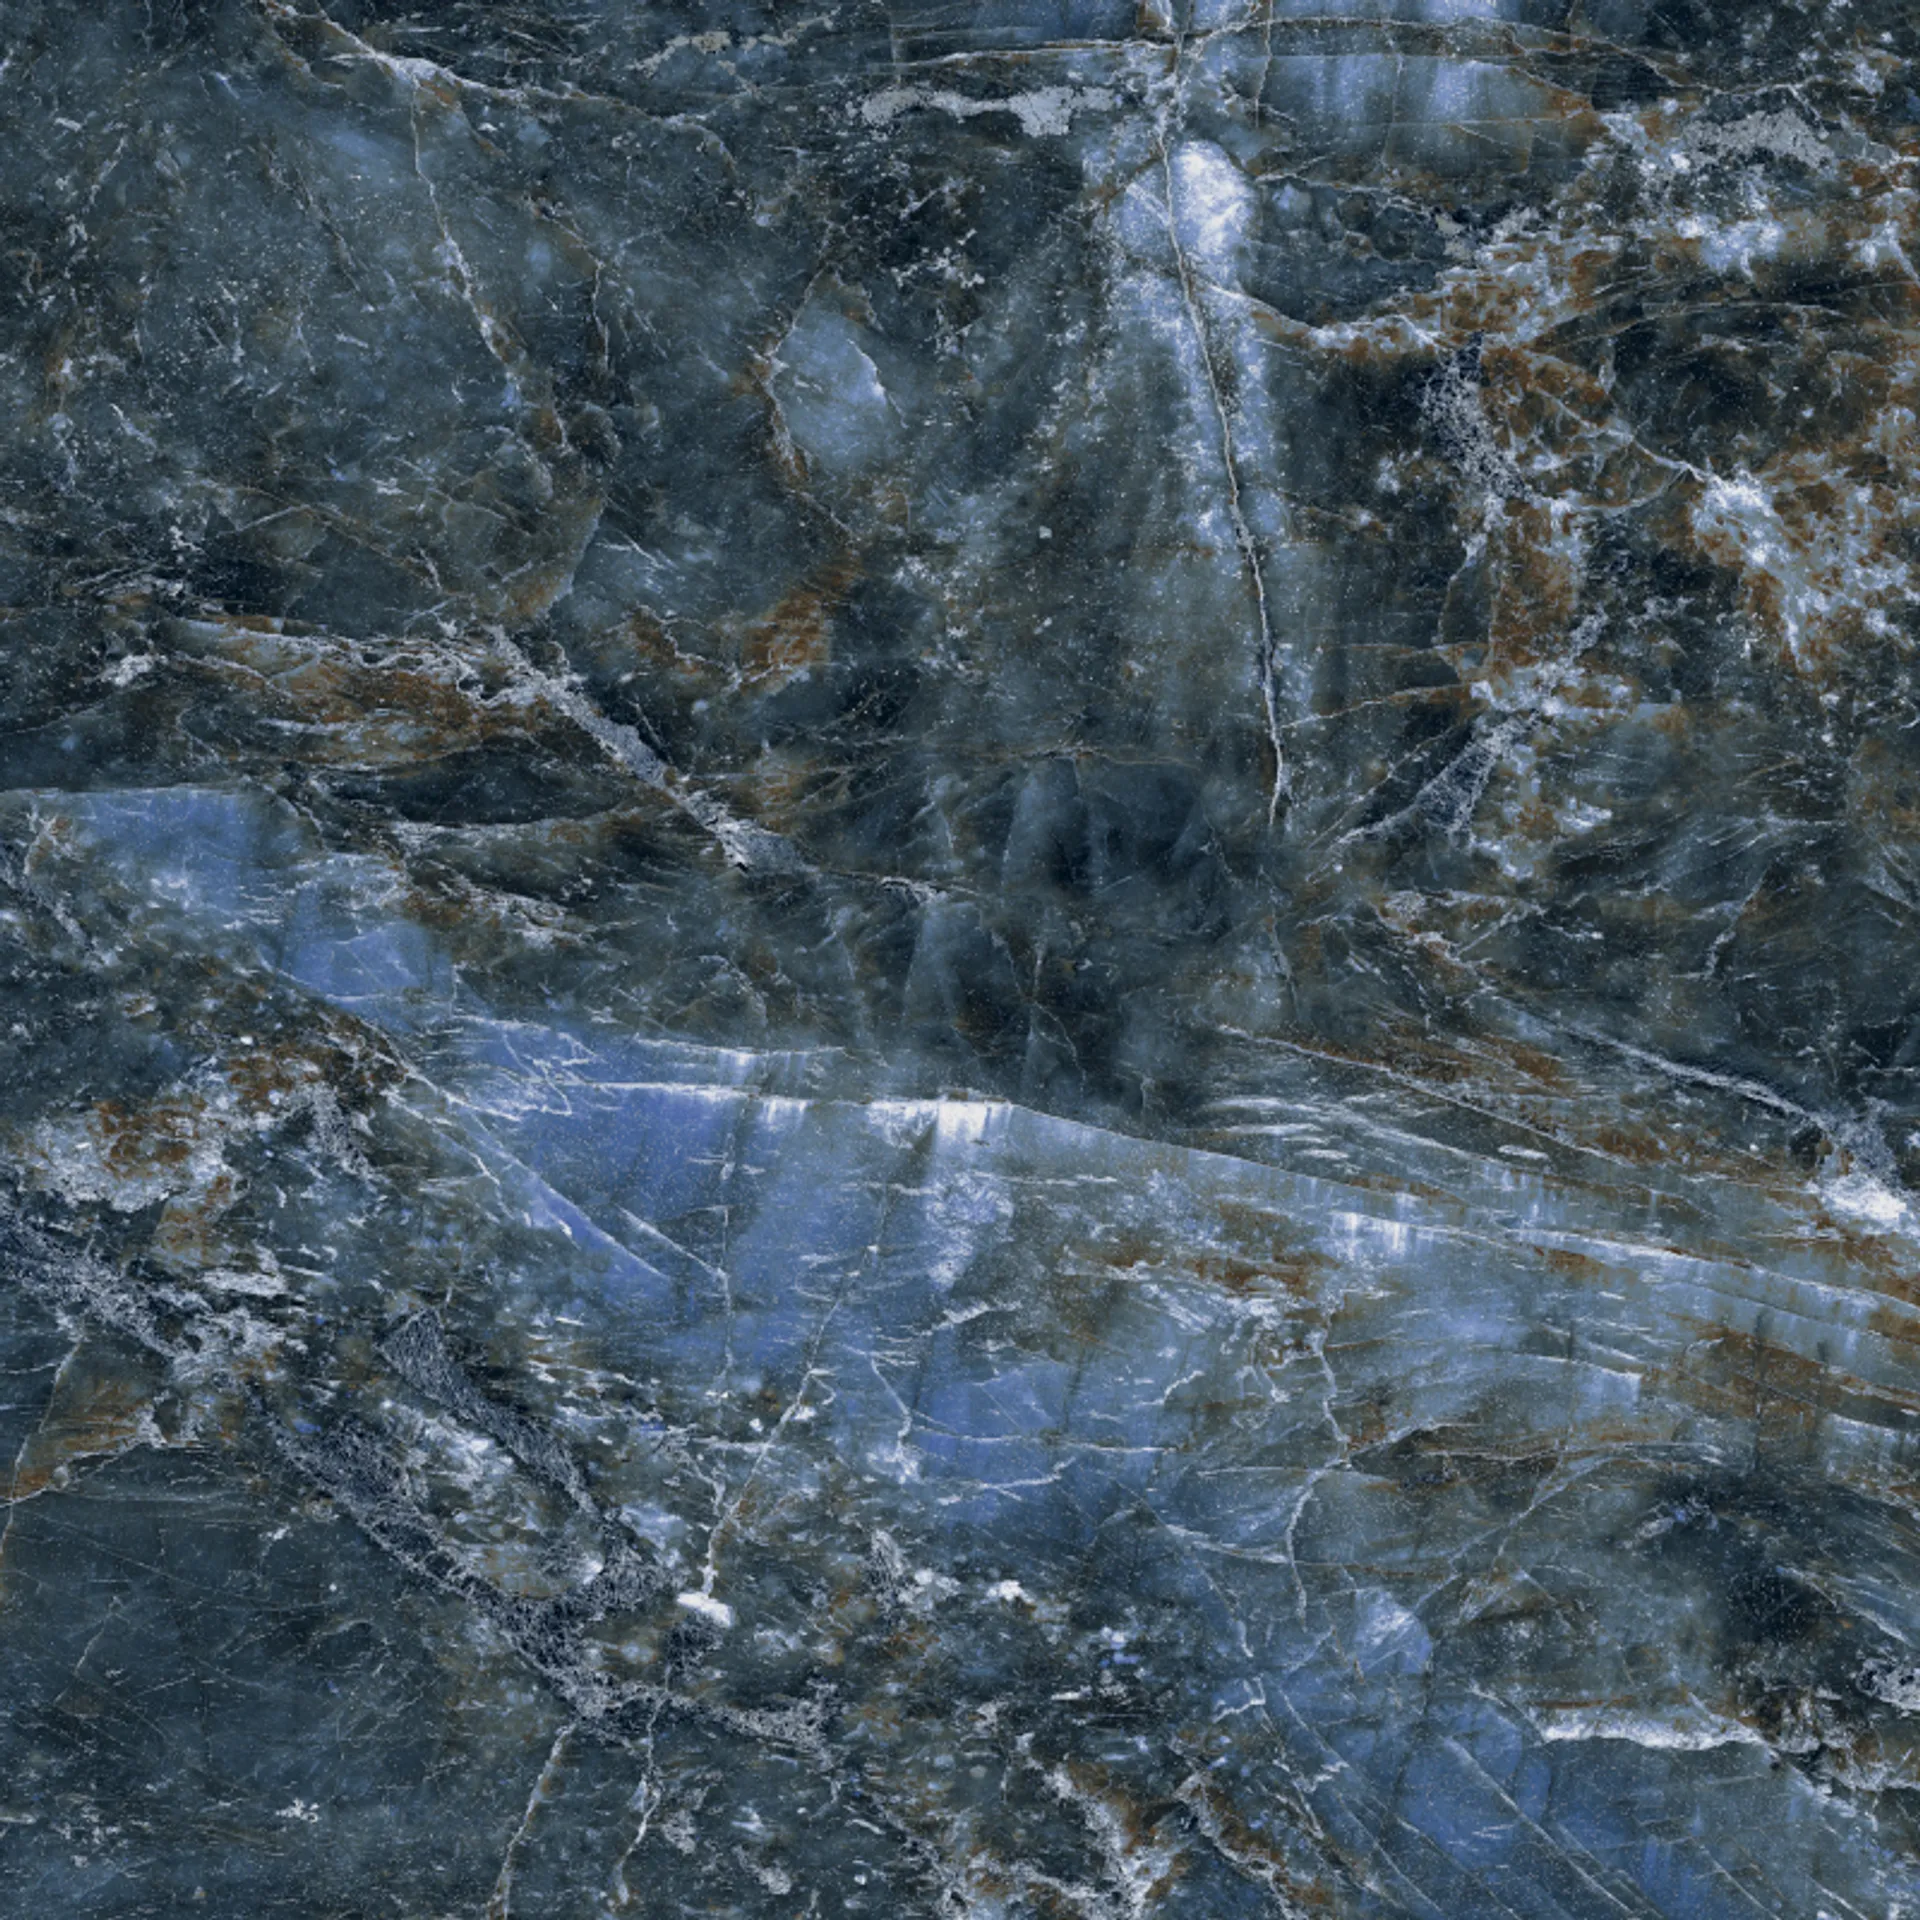 Gres Color Crush blue polished rectified 79,8x79,8 Opoczno